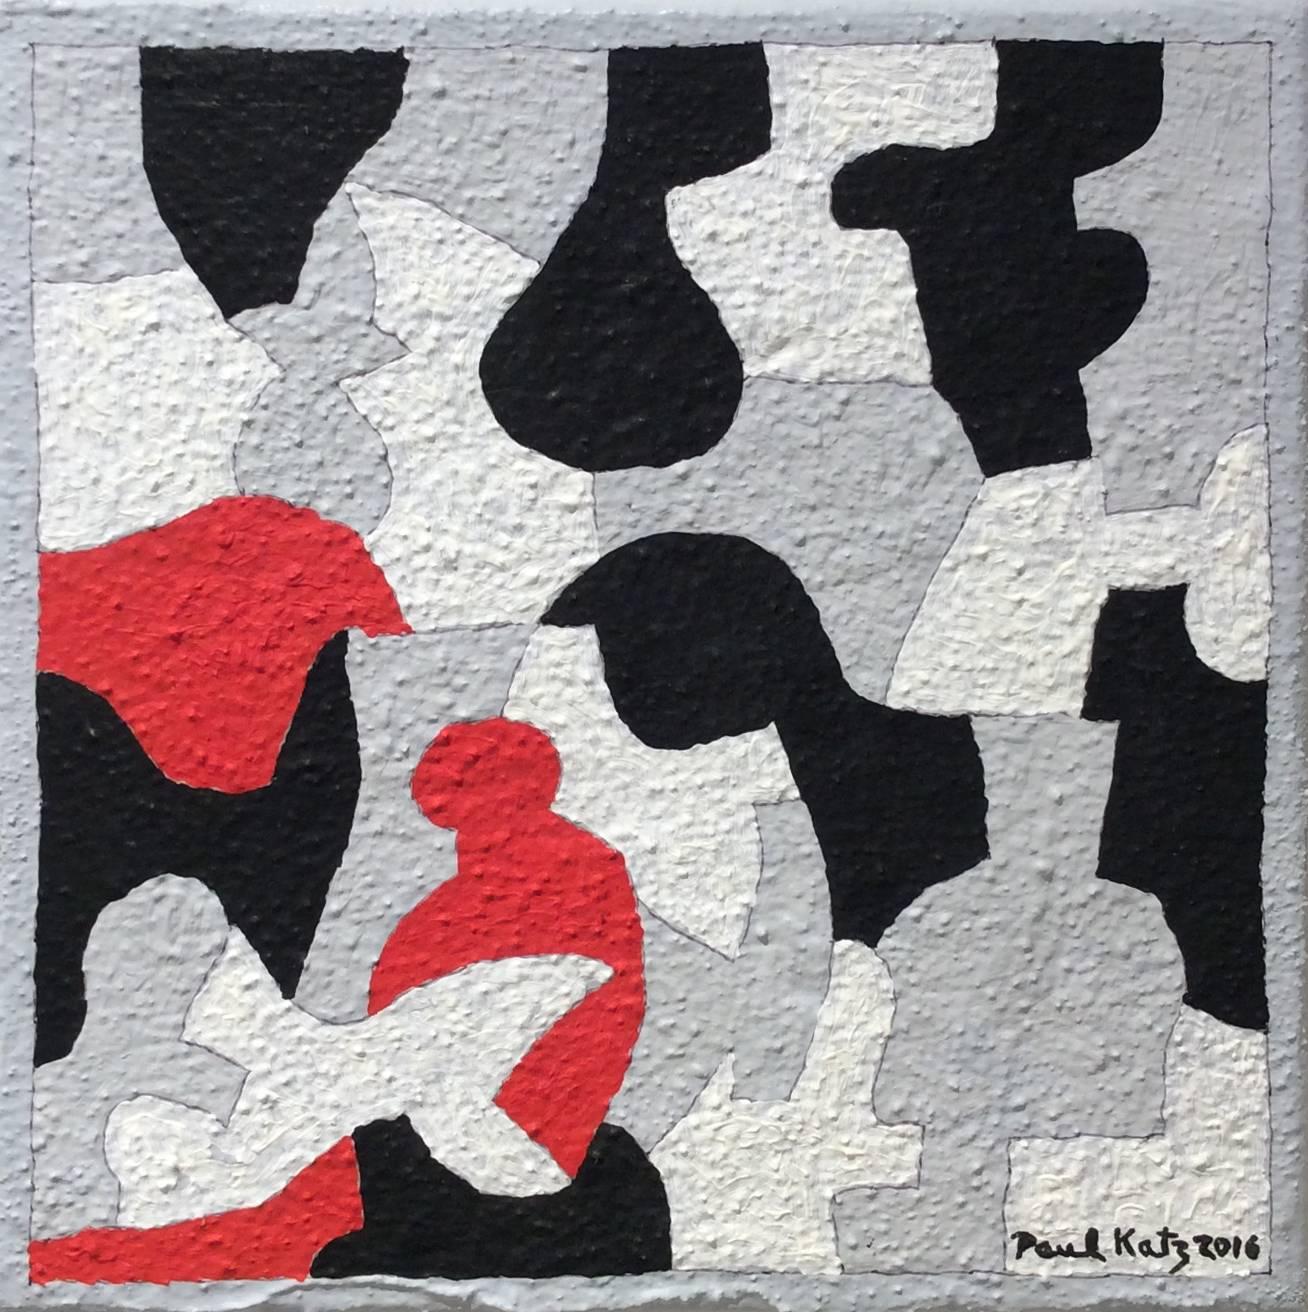 Paul Katz Abstract Painting - Interlock #35 (Graphic, Abstract Red, Black, White & Grey Painting on Canvas)